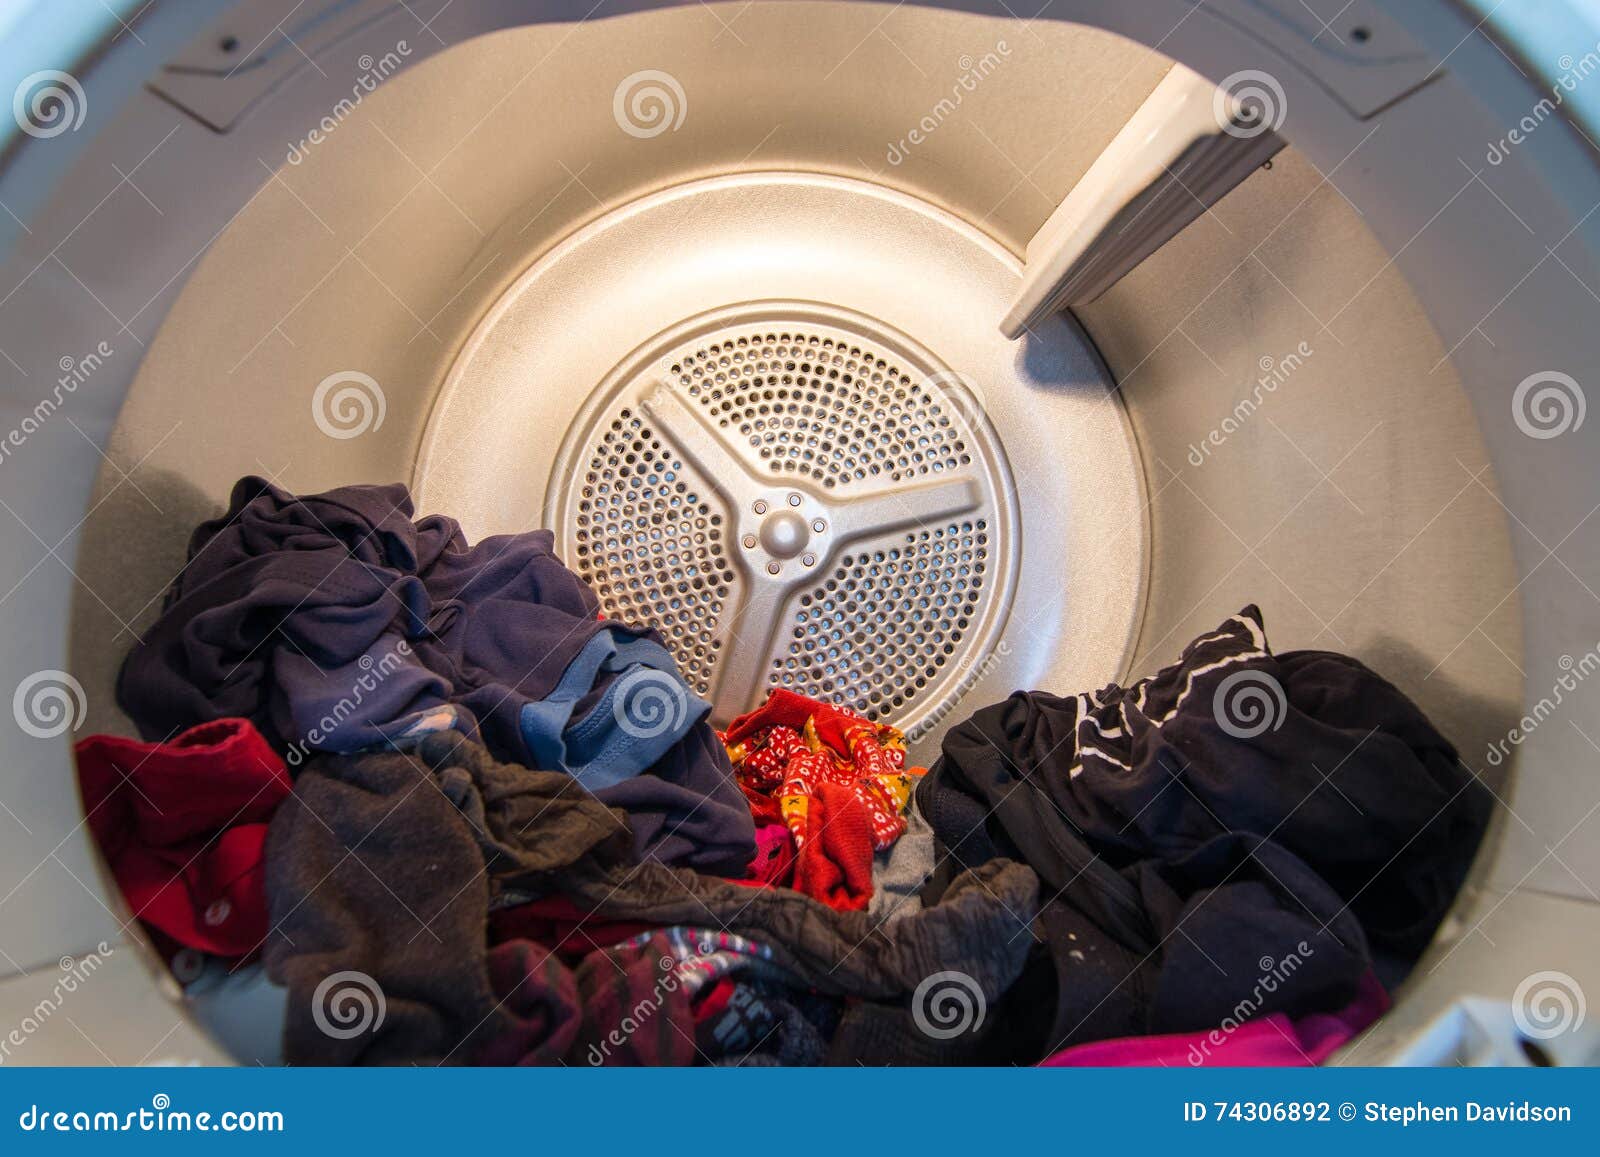 Tumble Dry Images – Browse 489 Stock Photos, Vectors, and Video